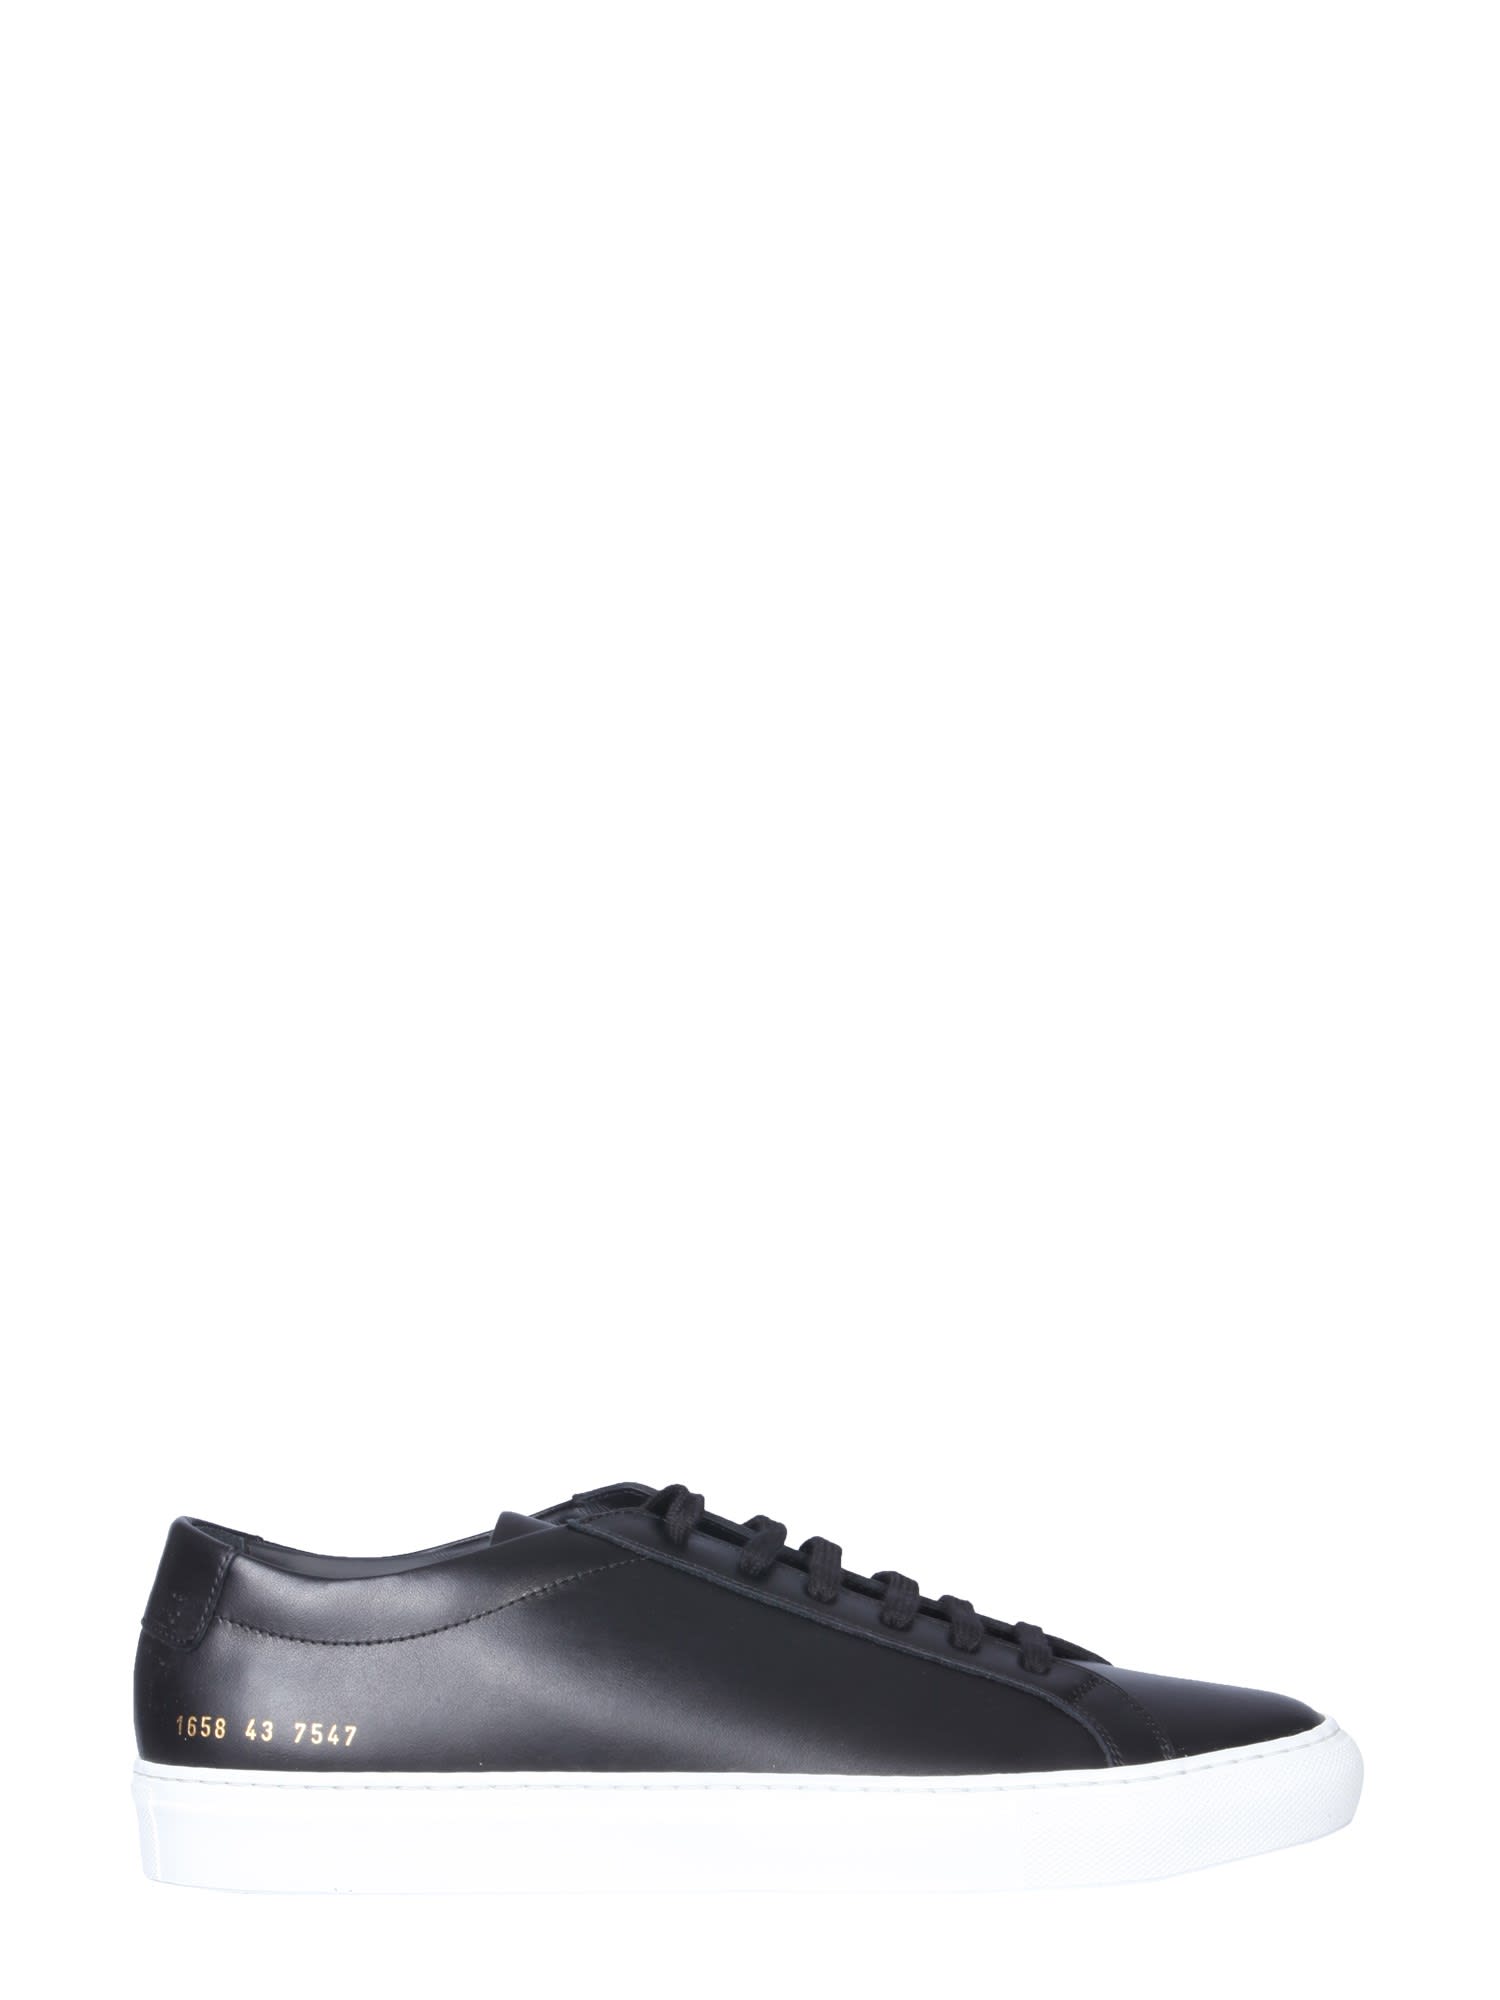 Common Projects Low Achilles Sneakers